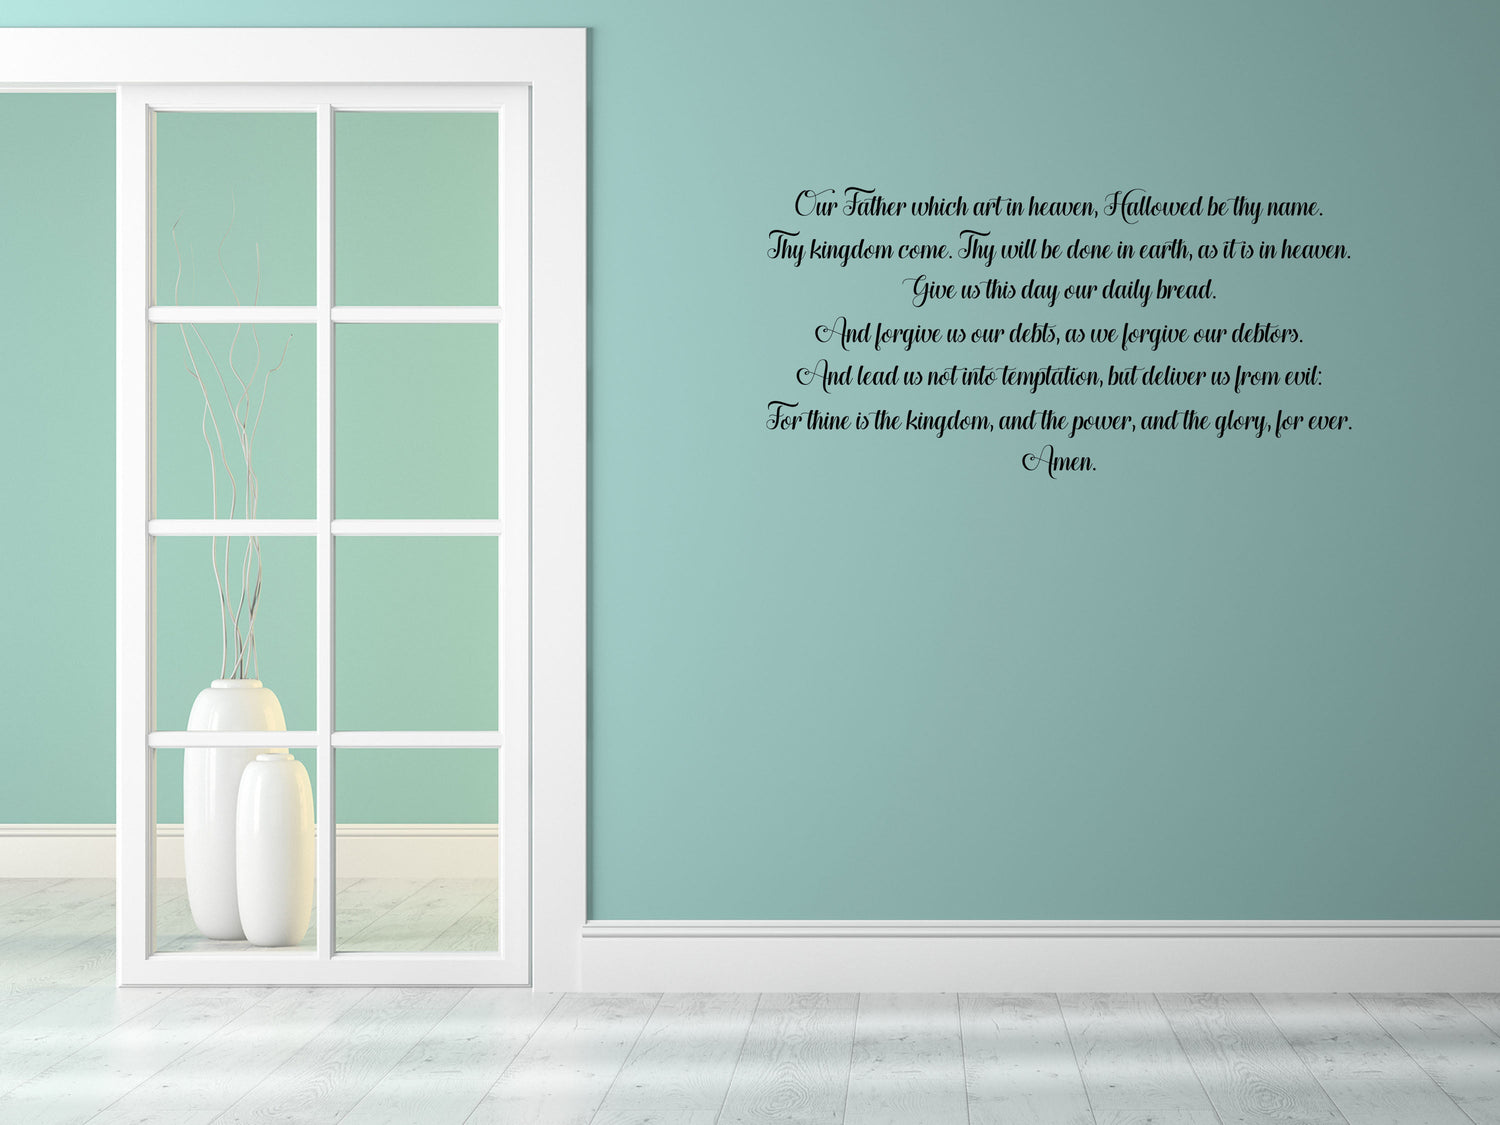 The Lord's Prayer Scripture Wall Decals Vinyl Wall Decal Inspirational Wall Signs 